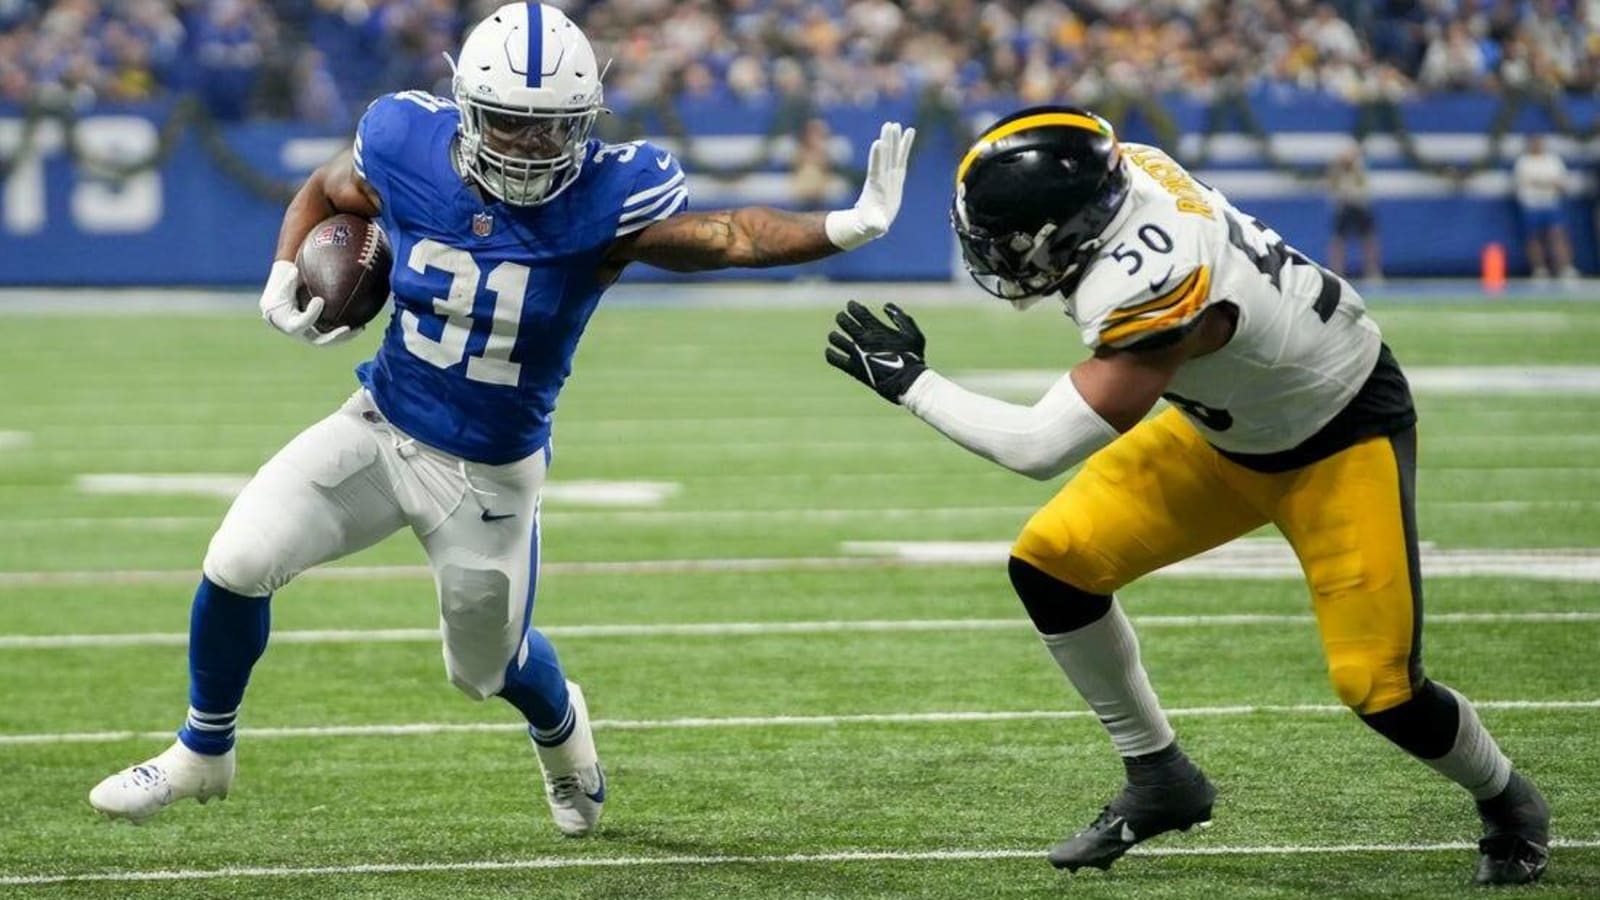 Gardner Minshew fires 3 TDs as Colts roll past Steelers